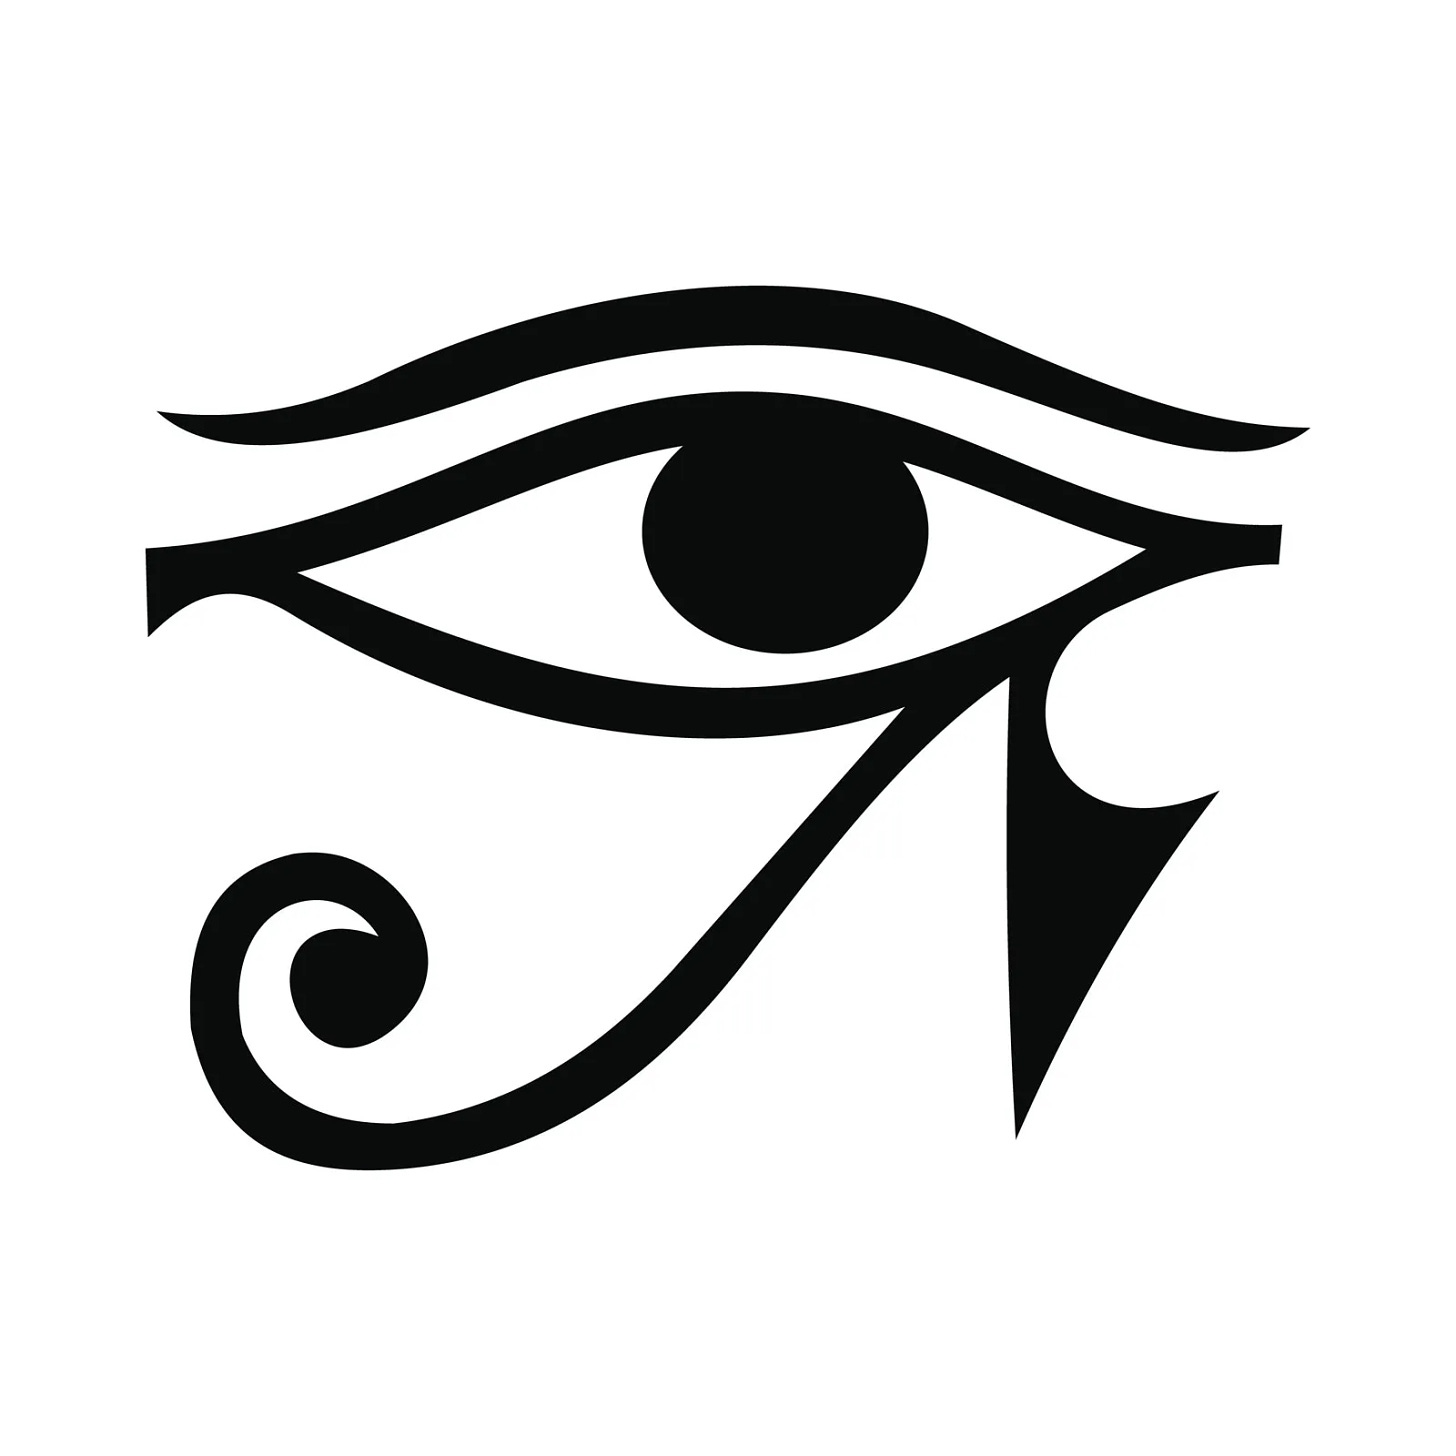 The Eye of Horus was believed to have protective magical power and appeared frequently in ancient Egyptian art.